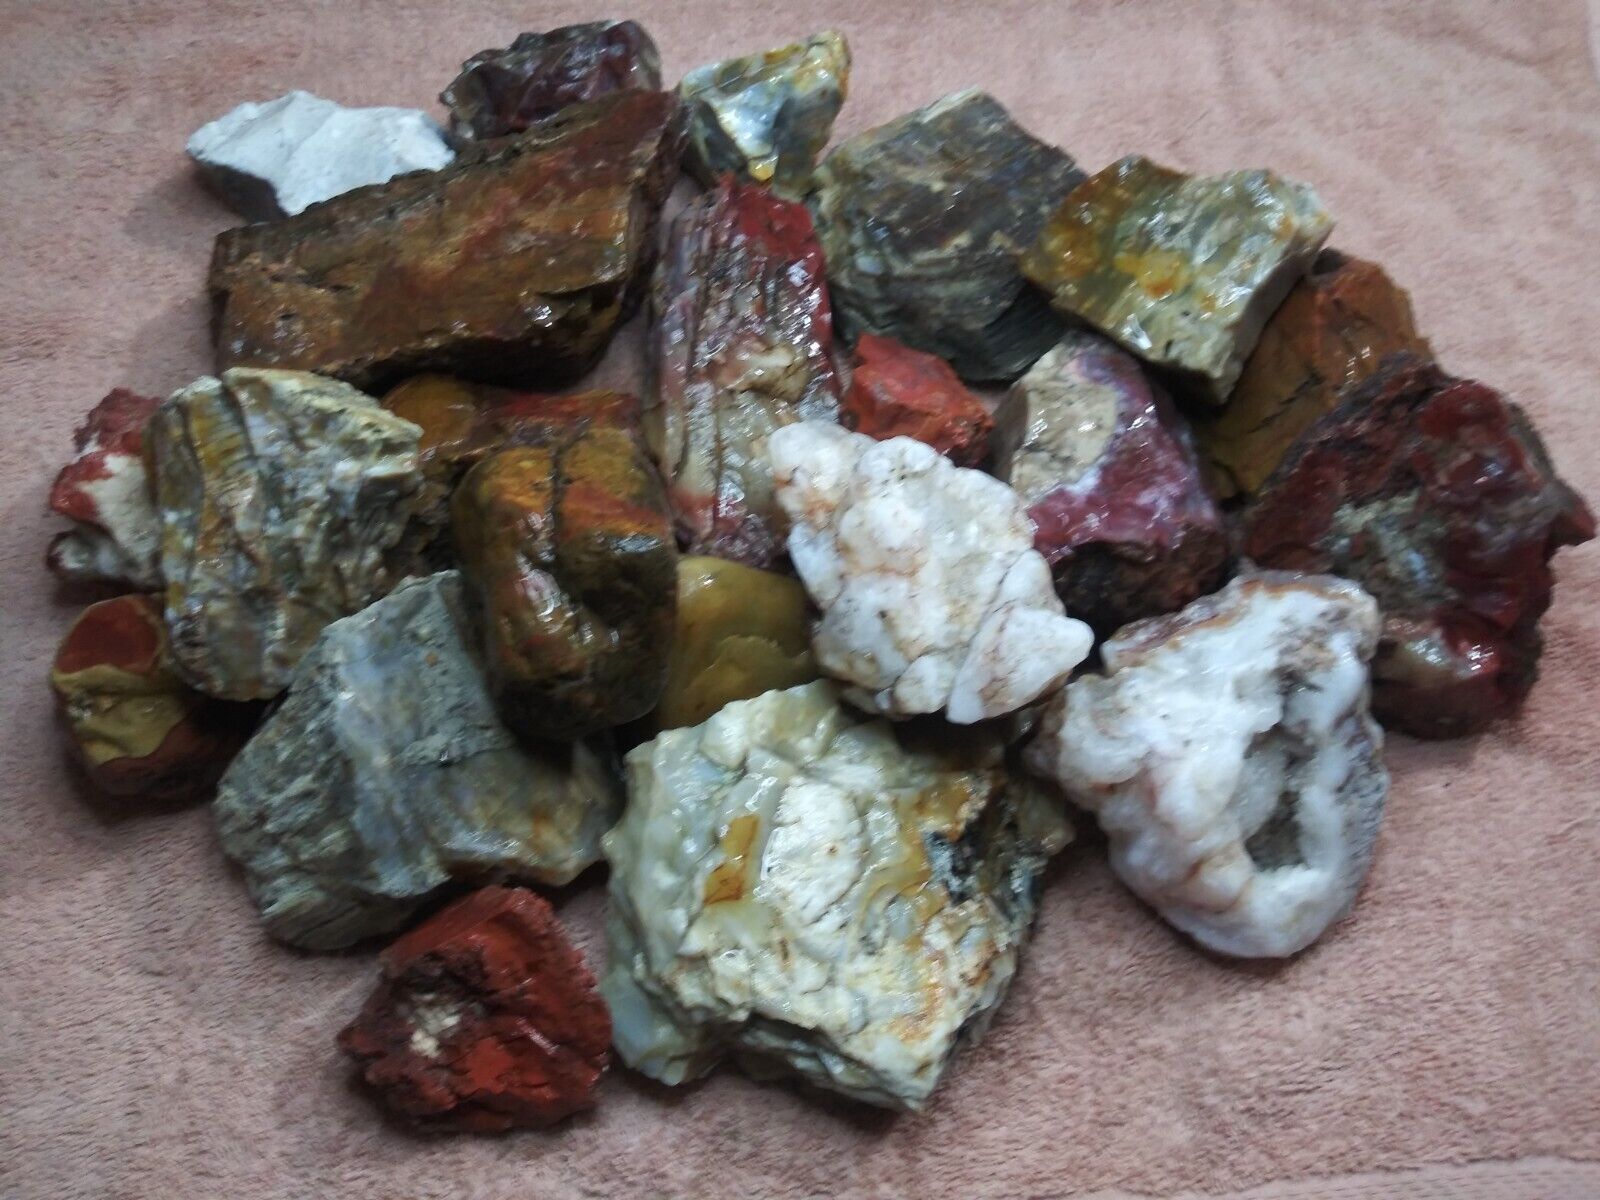 25 Lbs. Great Mix of Large Rough Stones From SW US (Quartz, Agate, Etc.) #BMIX5